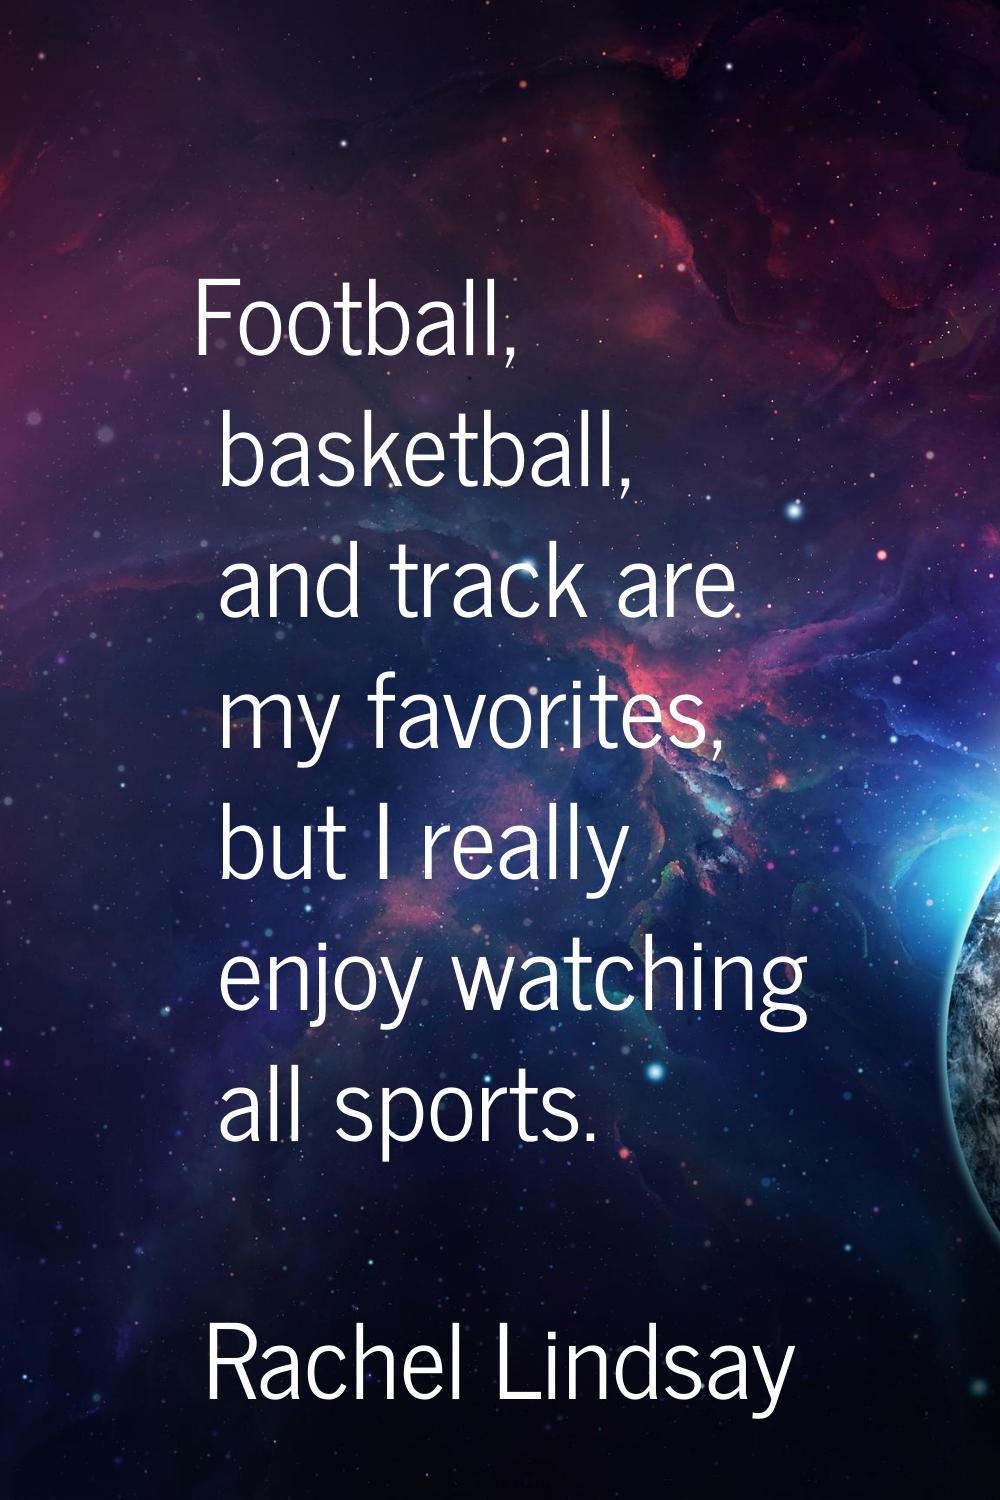 Football, basketball, and track are my favorites, but I really enjoy watching all sports.